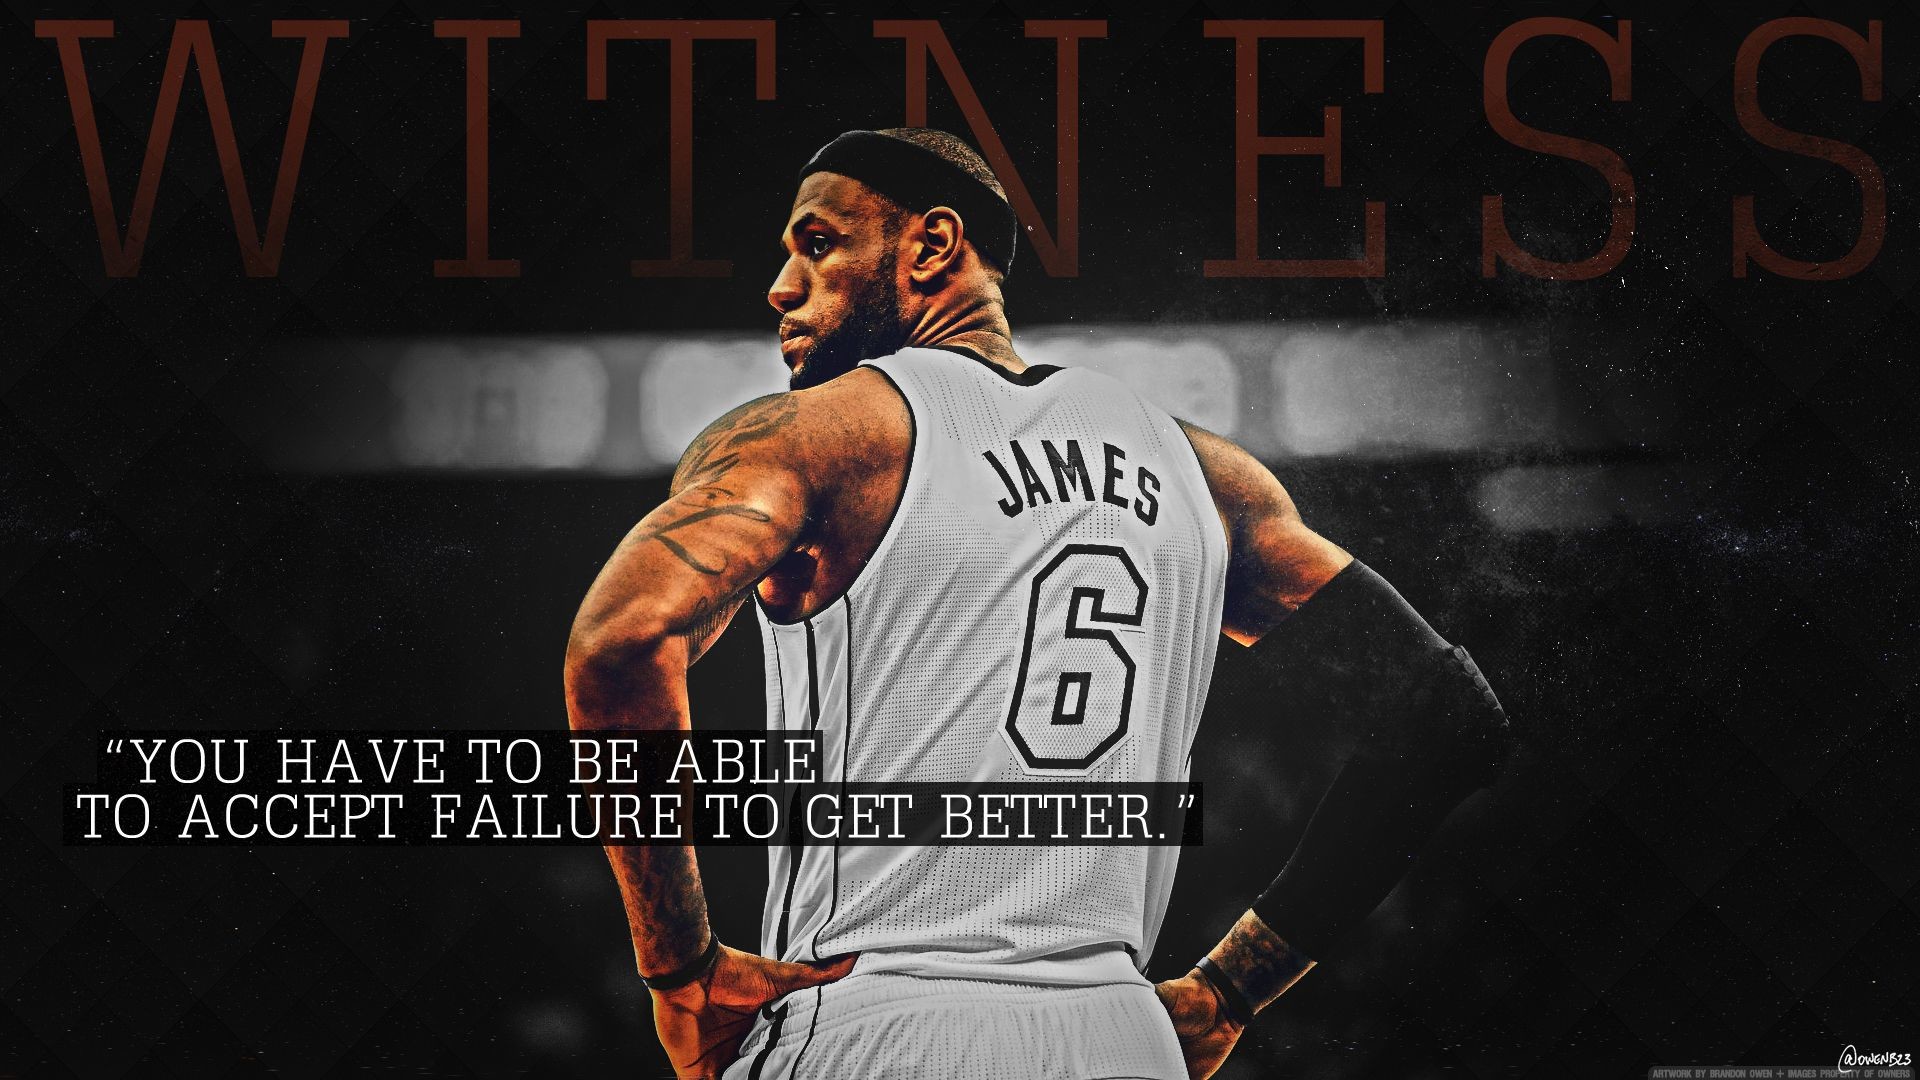 Lebron James Quotes About Failure Wallpaper Ideas For The House 1920x1080